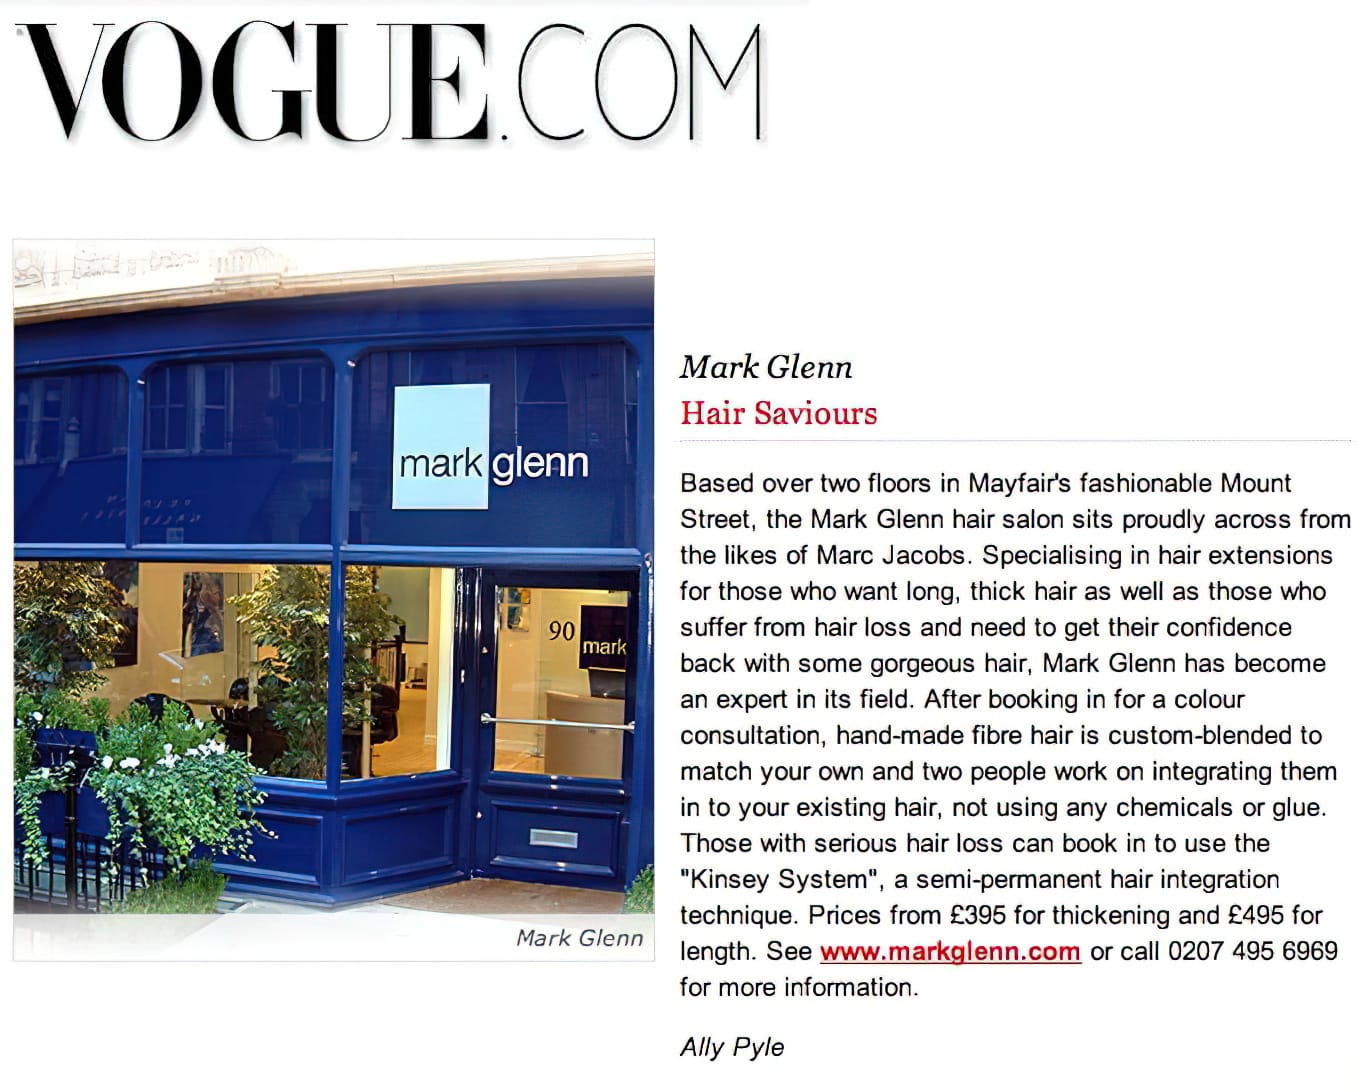 Mark Glenn - both 'hair saviours' and 'the hair extension experts' says Vogue